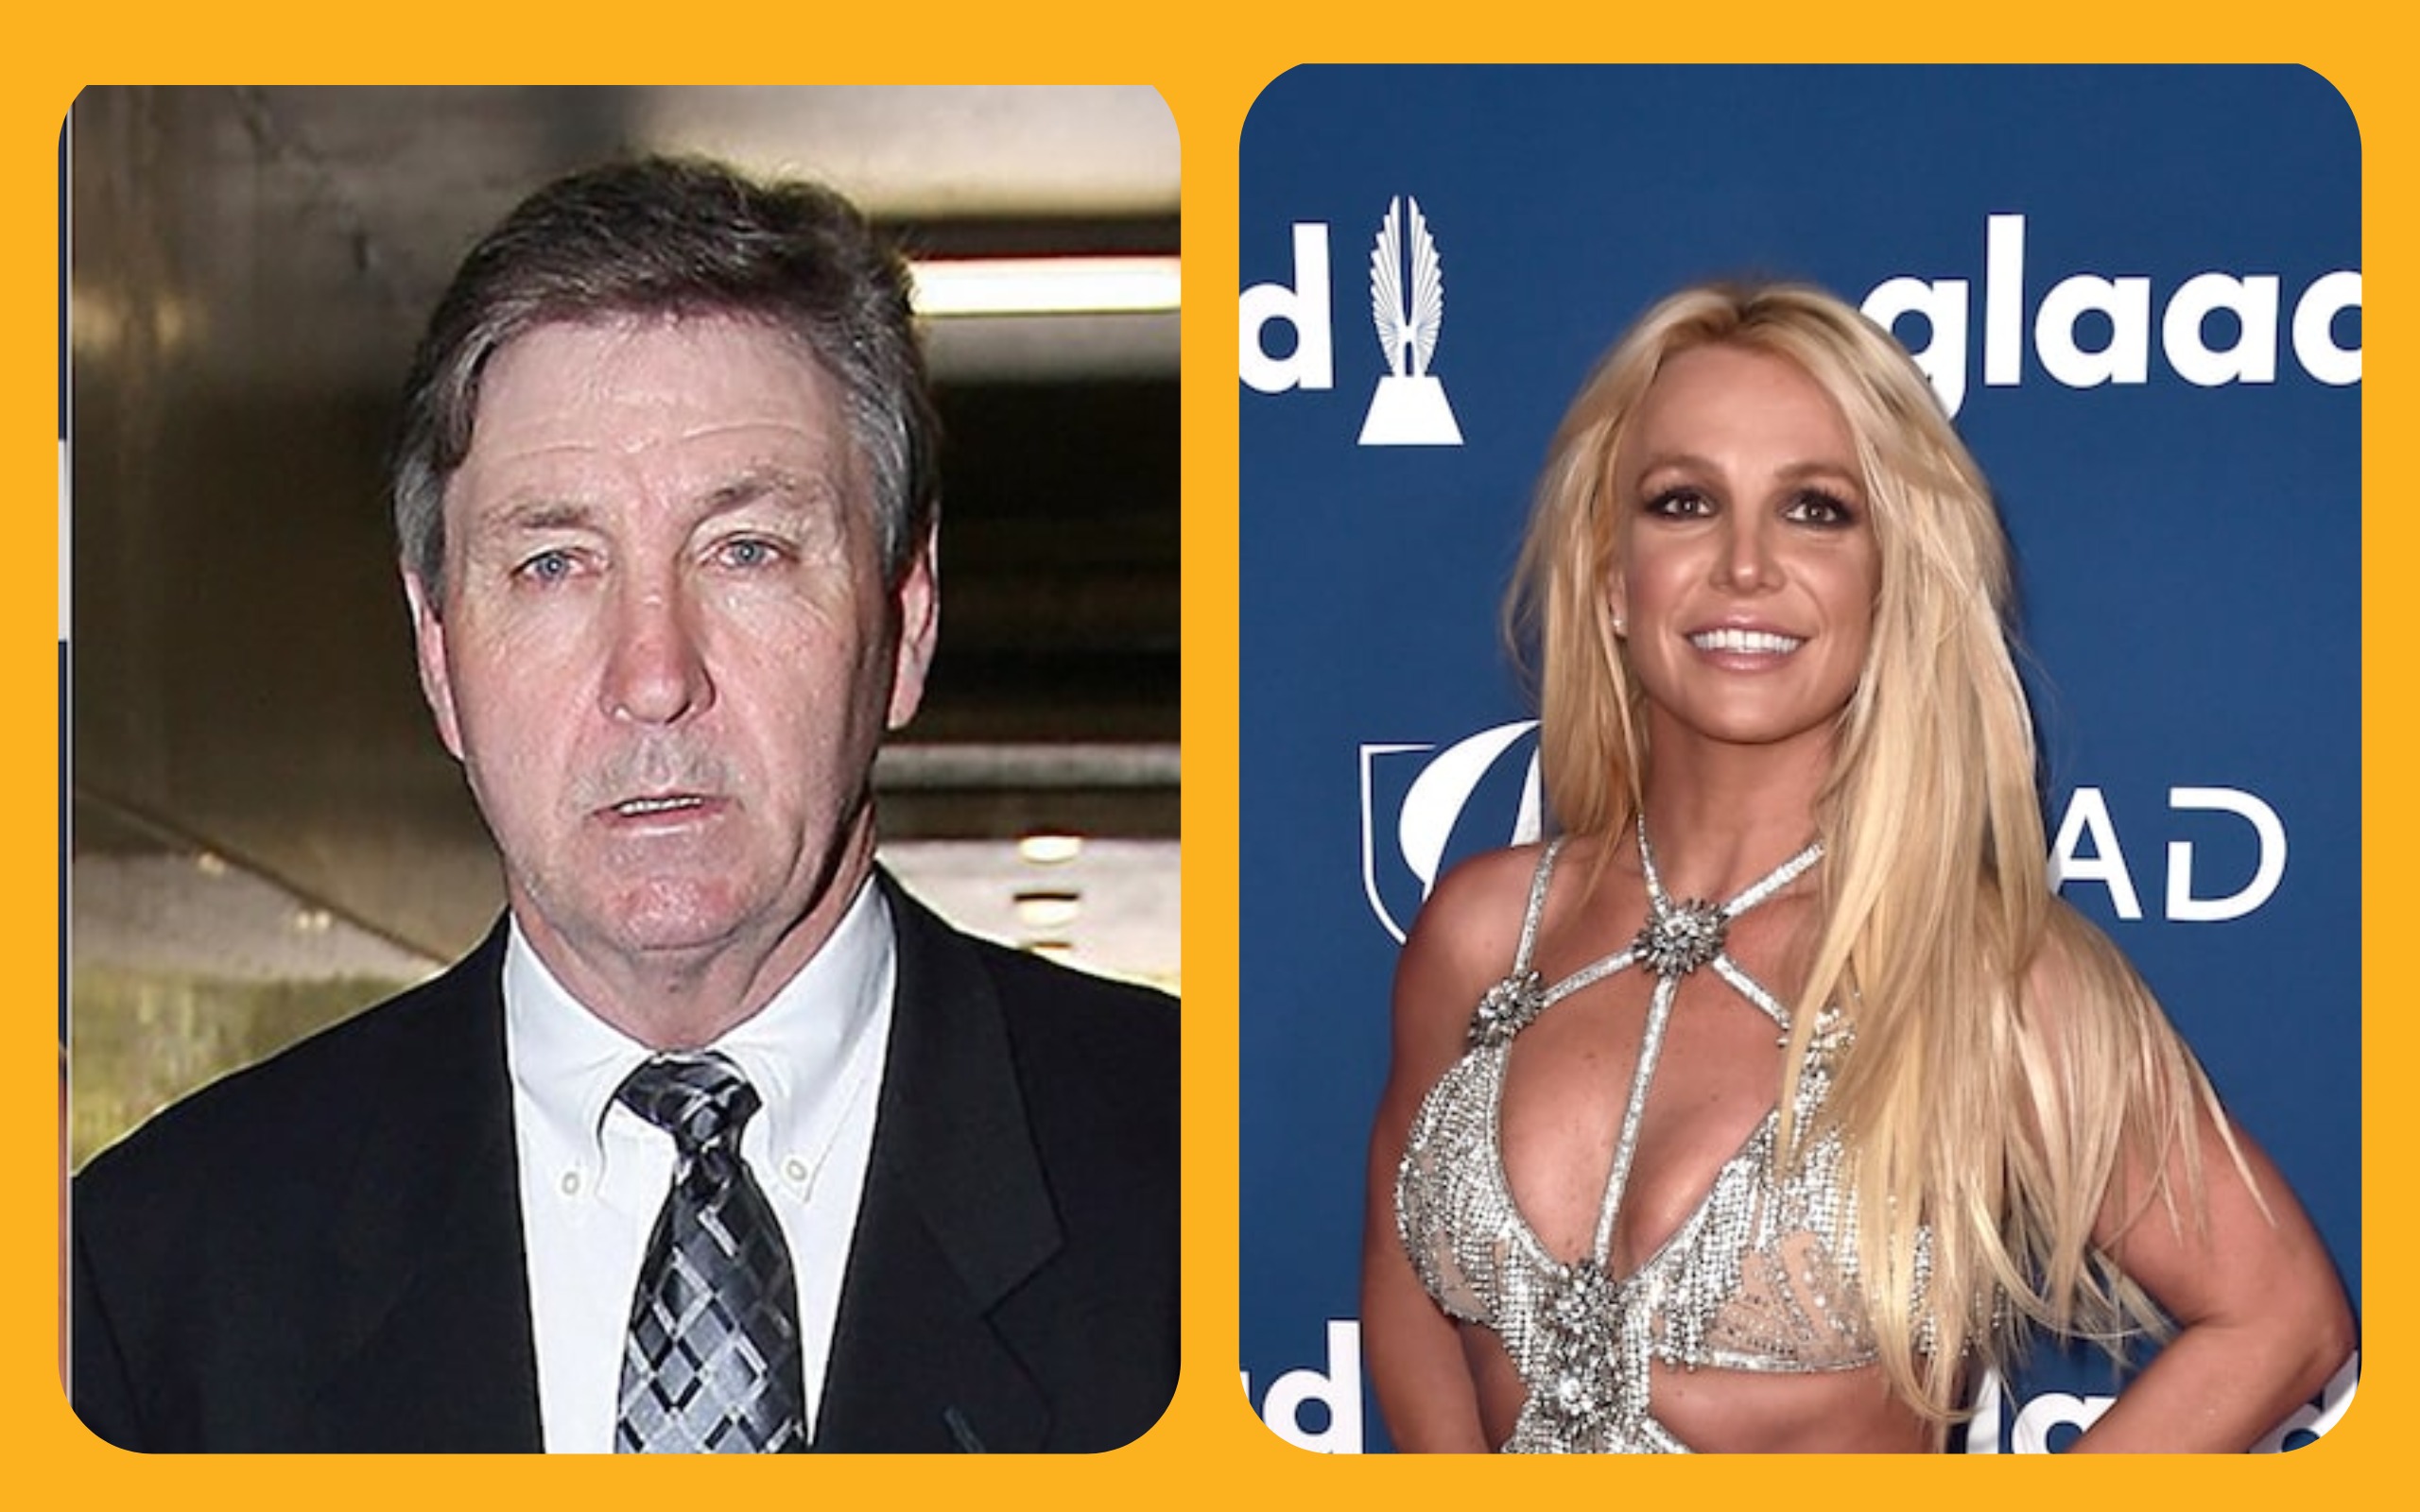 Britney Spears’ ongoing legal dispute with her dad Jamie is finally over after they reached a settlement.